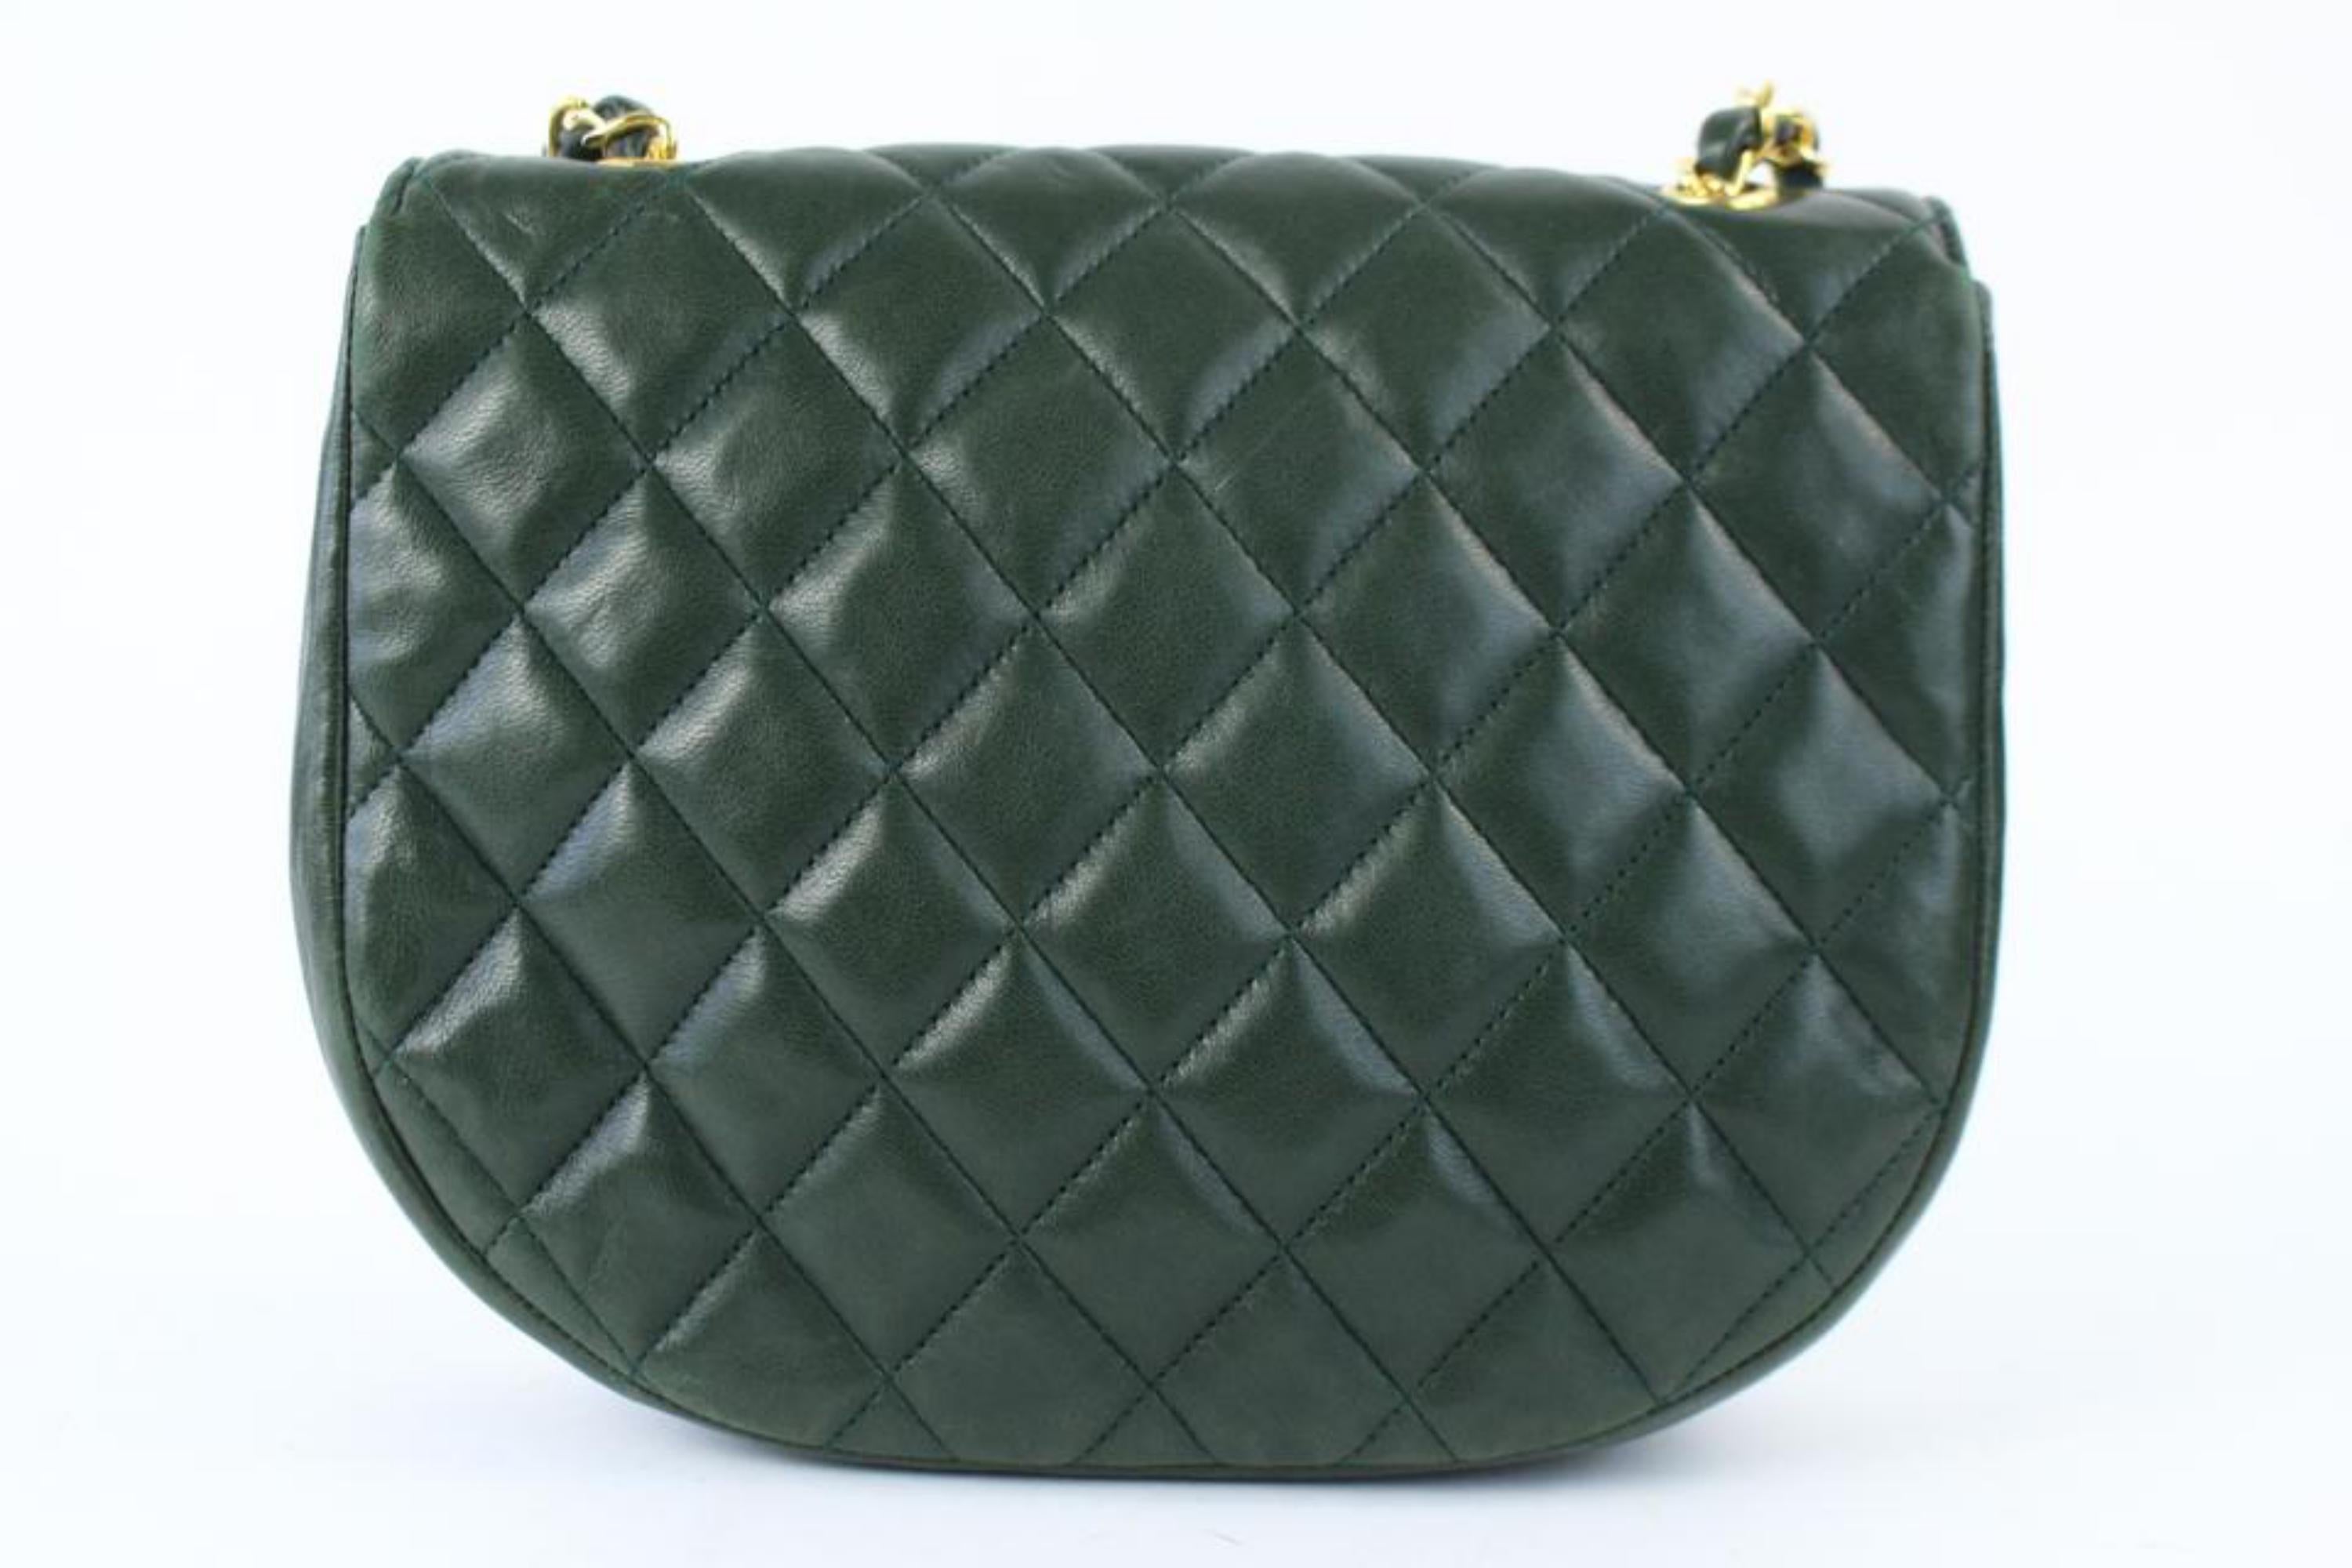 Chanel (Ultra Rare) Jumbo Logo Flap 17cz0717 Forest Green Leather Cross Body Bag For Sale 1